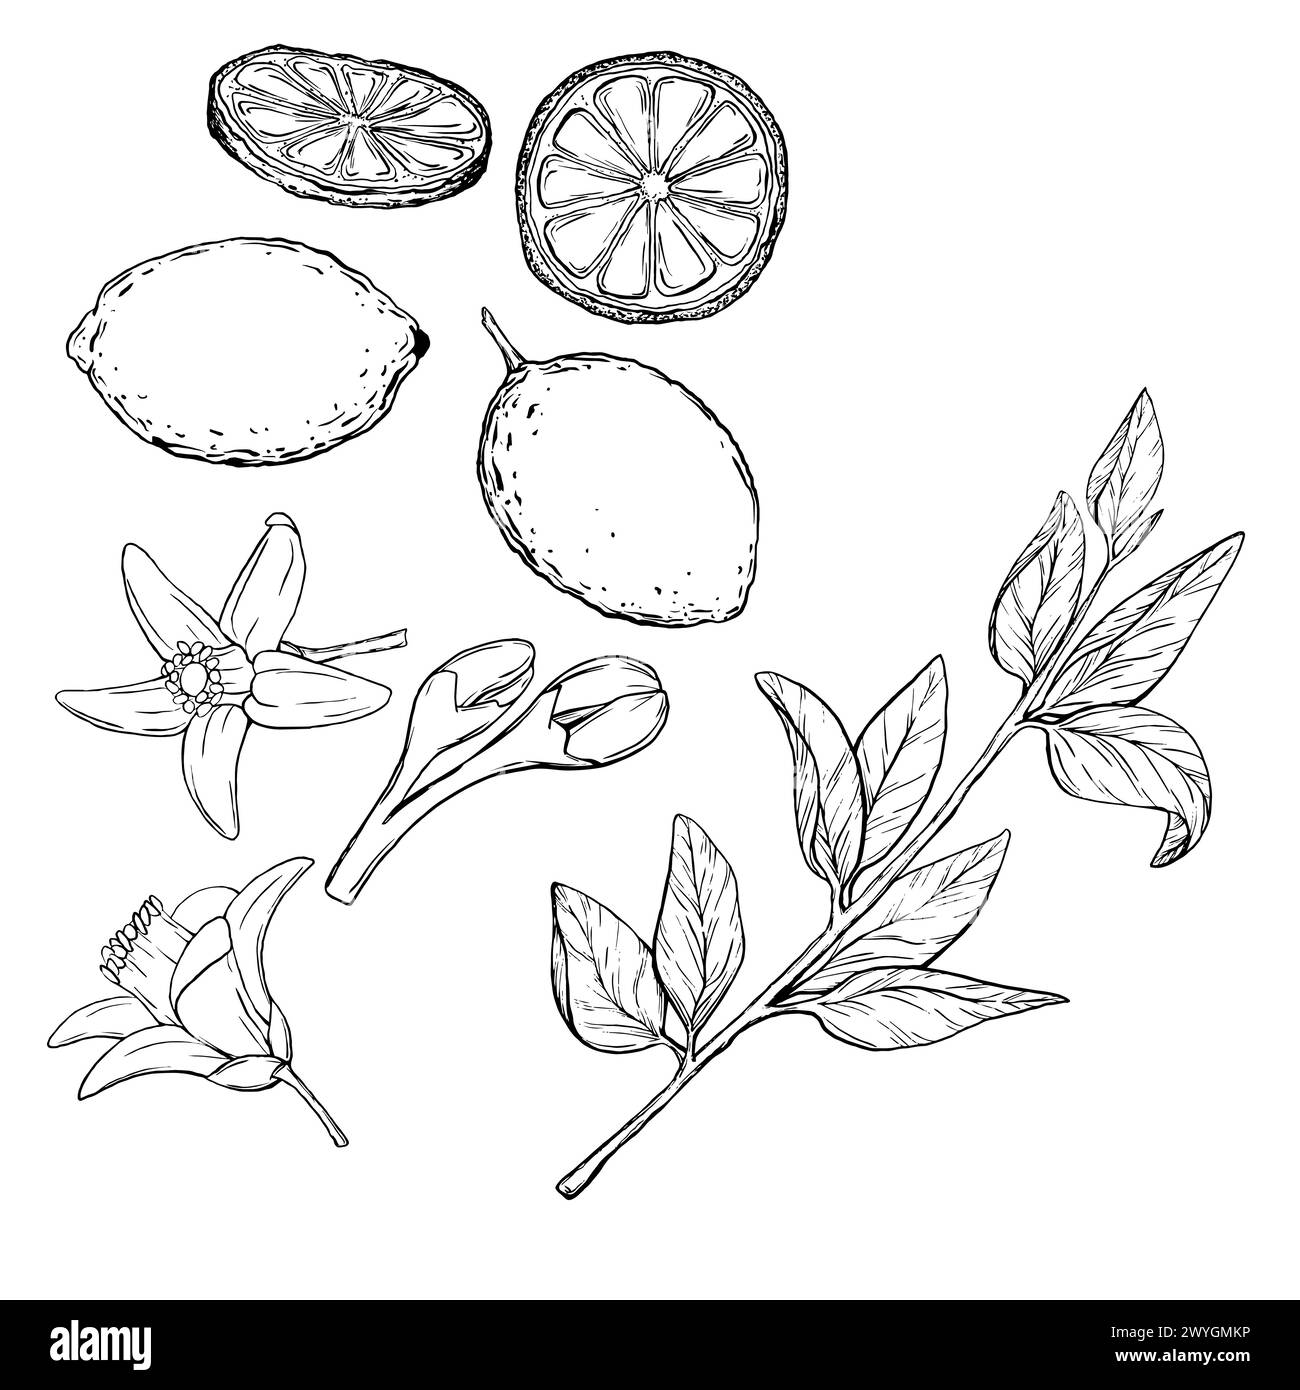 Vector Set juicy Lemons with leaves on the branches with flowers. Graphic botanical illustration Citrus fruit in line art style, sketch, chalkboard Stock Vector